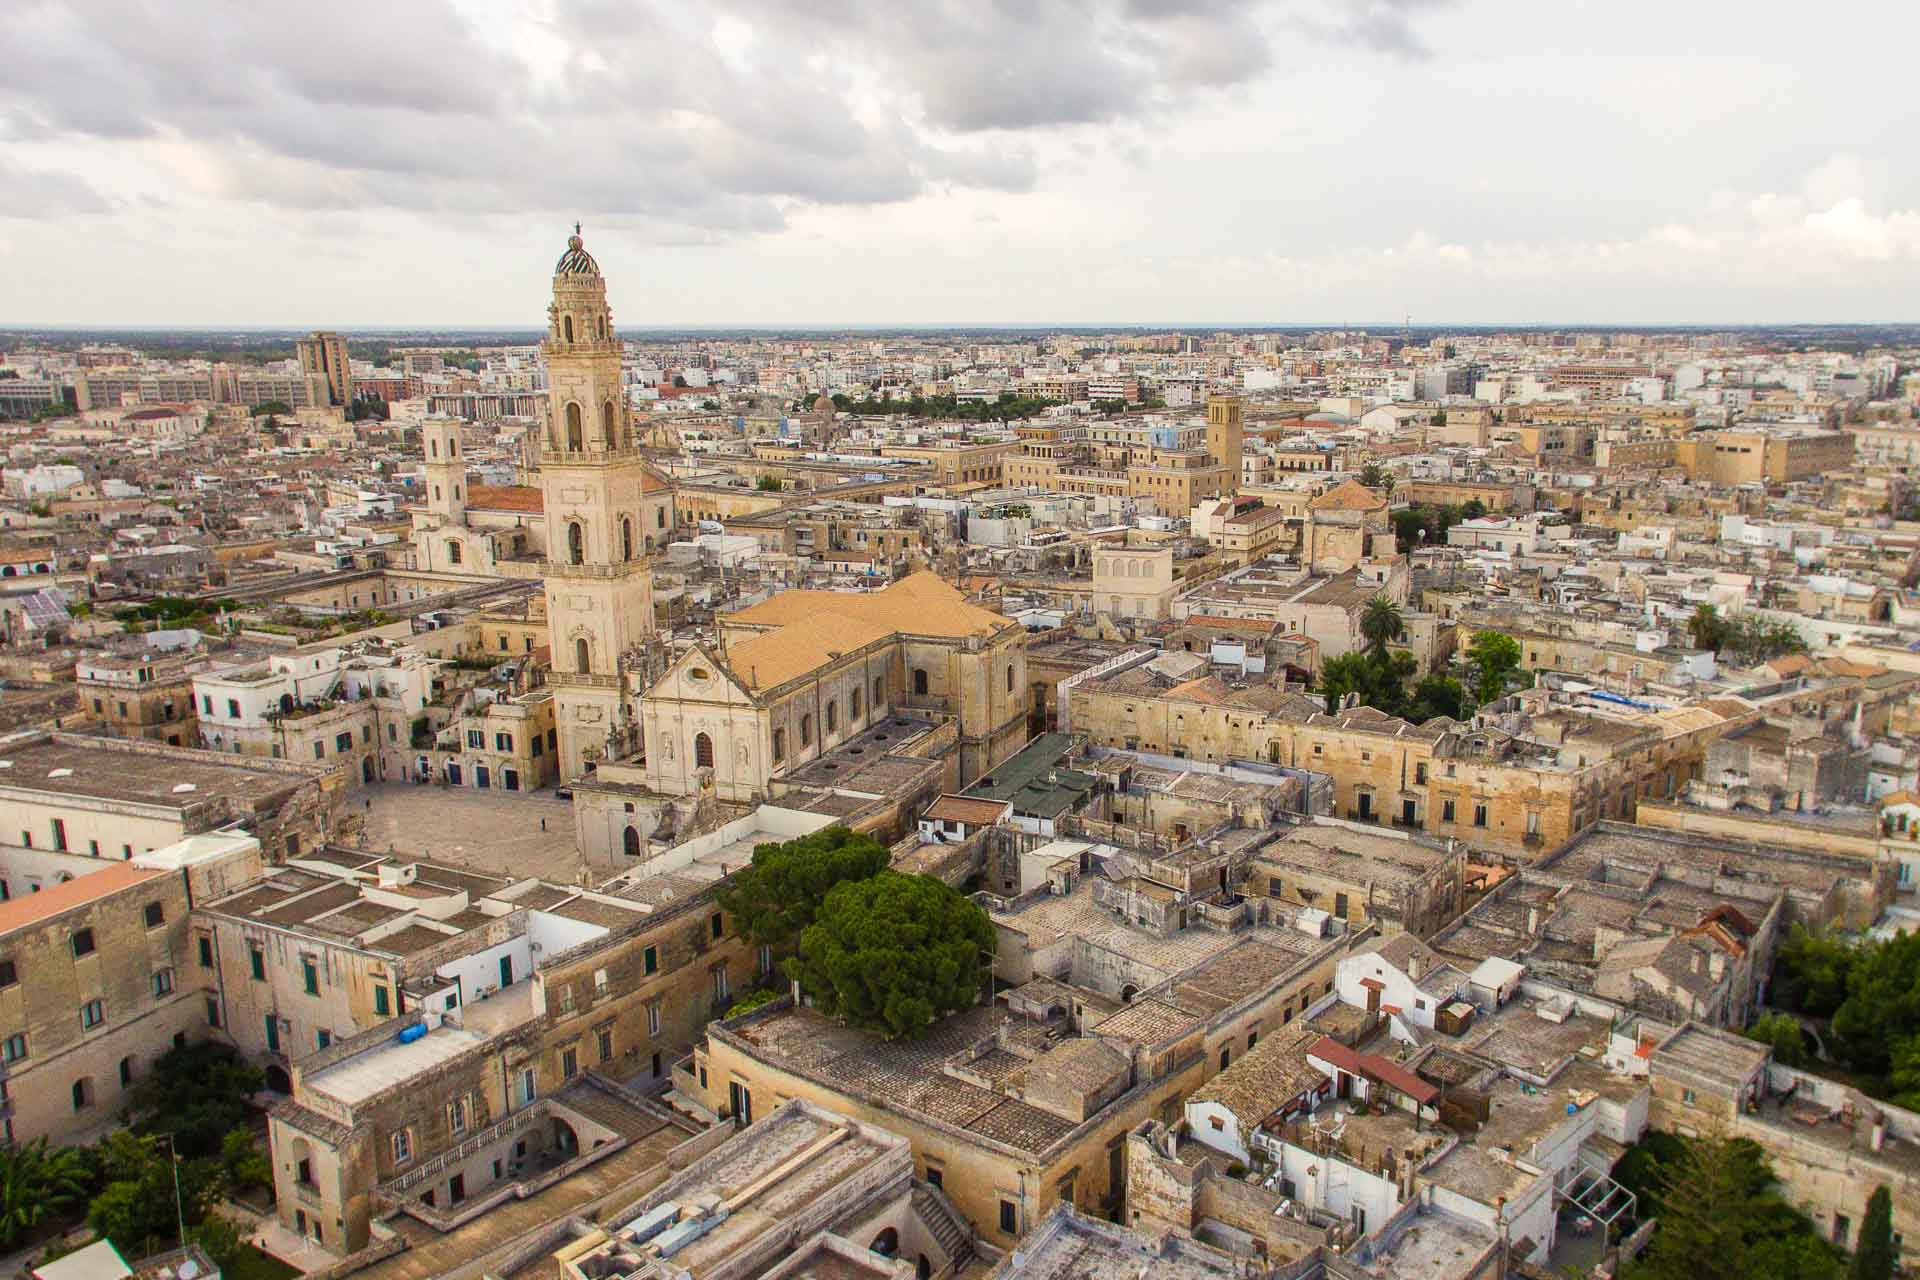 Aerial shot of Lecce with the main cathedral